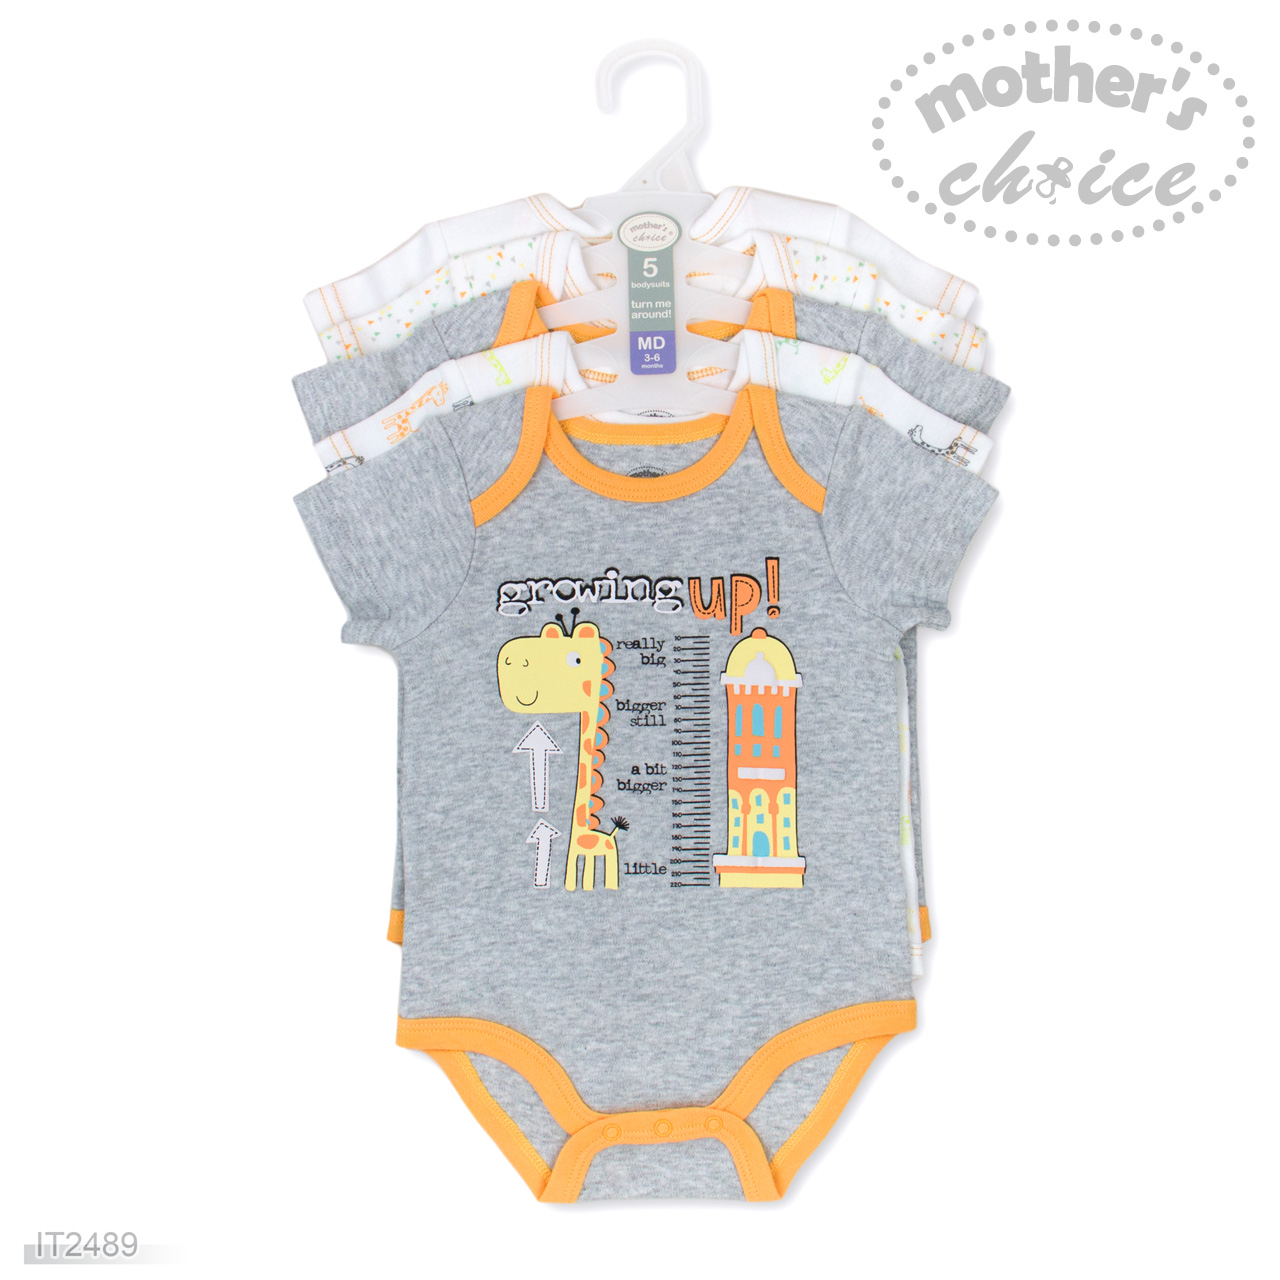 Mother's Choice 5-Piece Pack Baby 100% Pure Cotton Short Sleeves Grey Giraffe Bodysuits